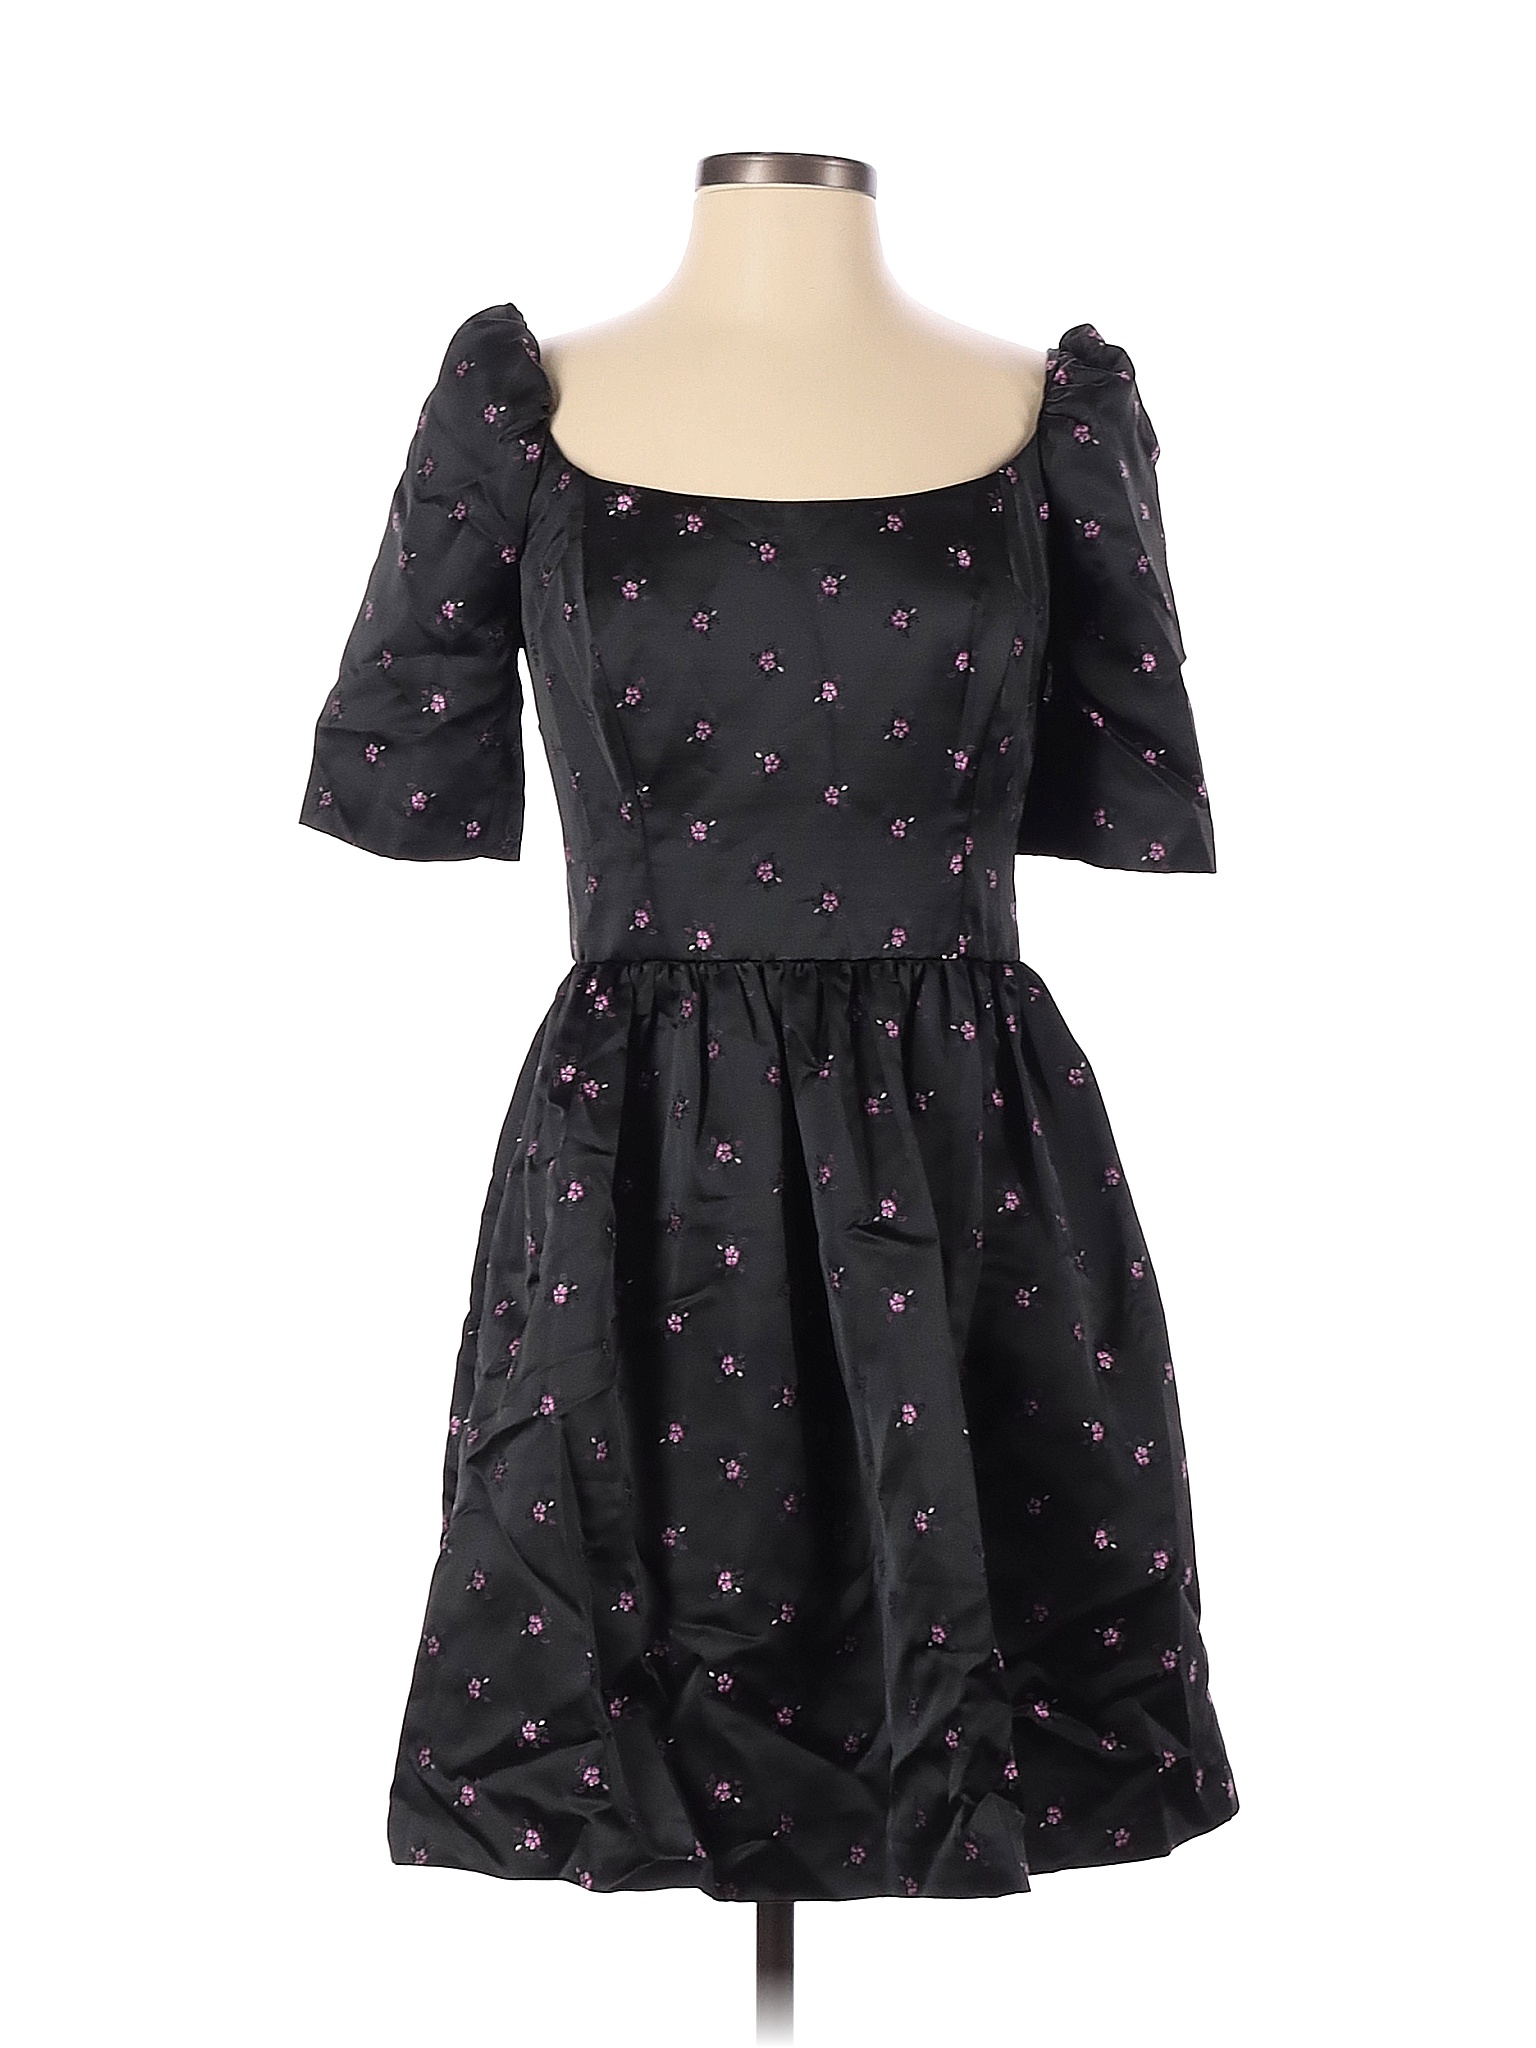 LC Lauren Conrad Polka Dot Fit And Flare Dress Size 14